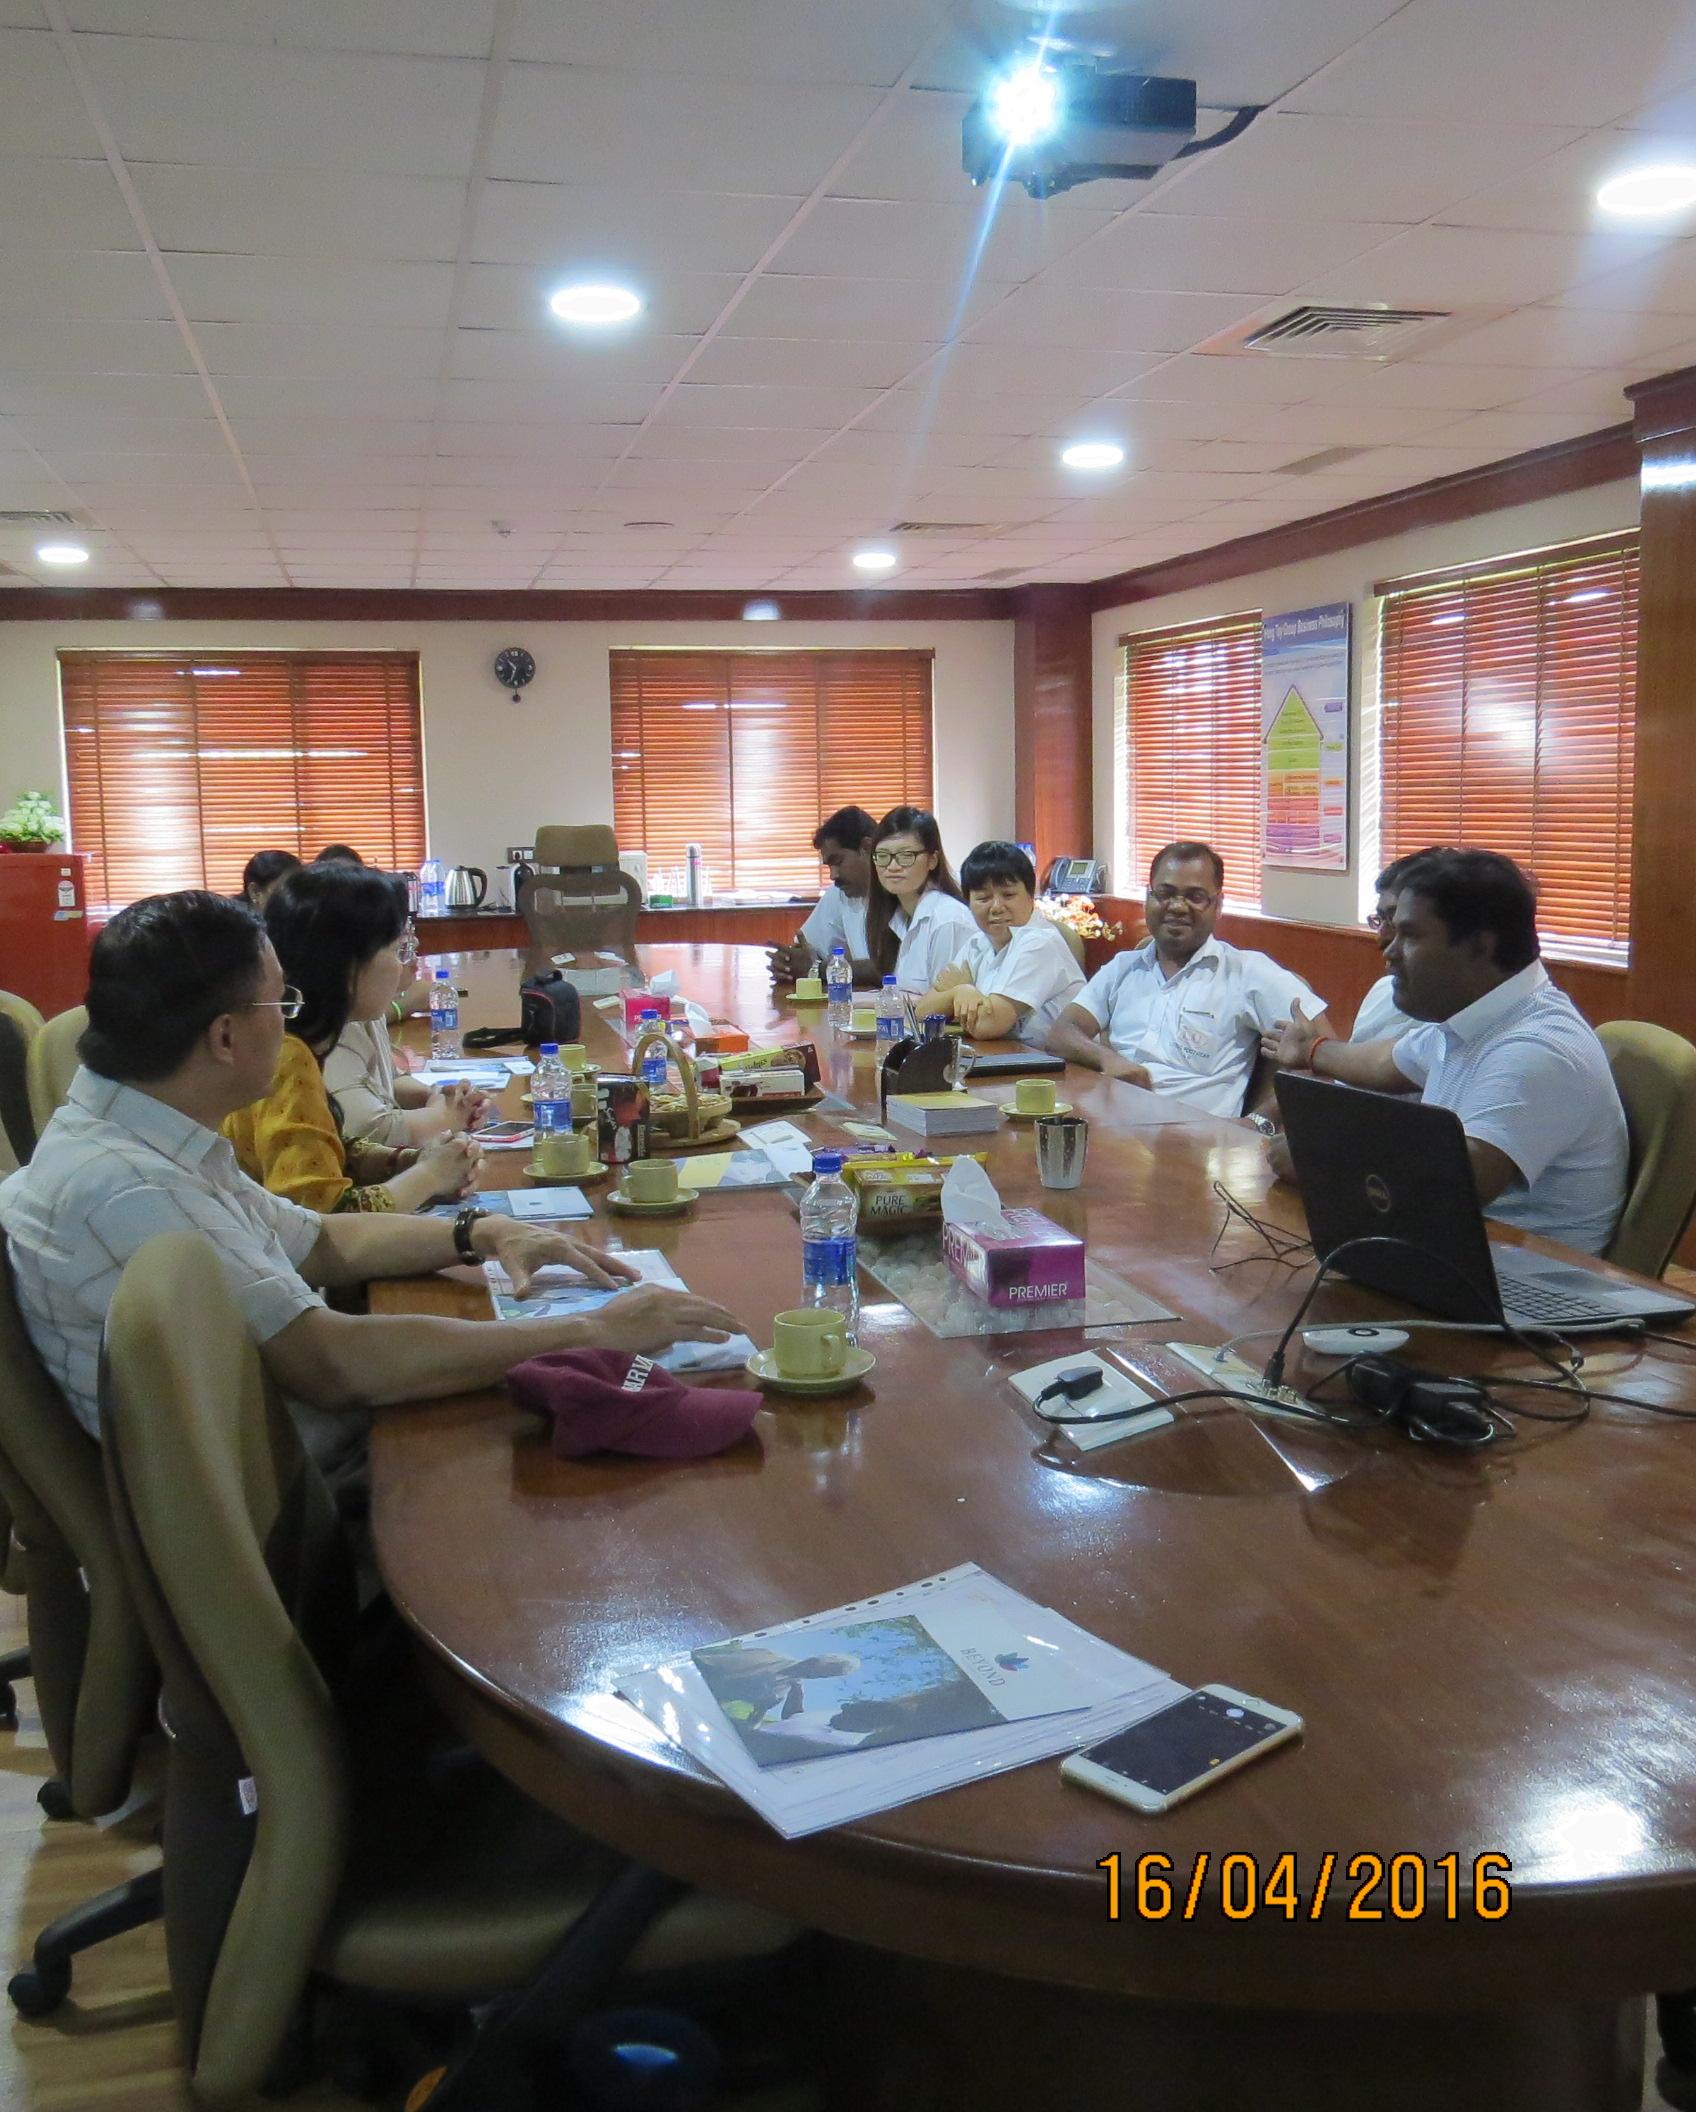 The Lotus Footwear briefing for Changhua Christian Hospital delegation